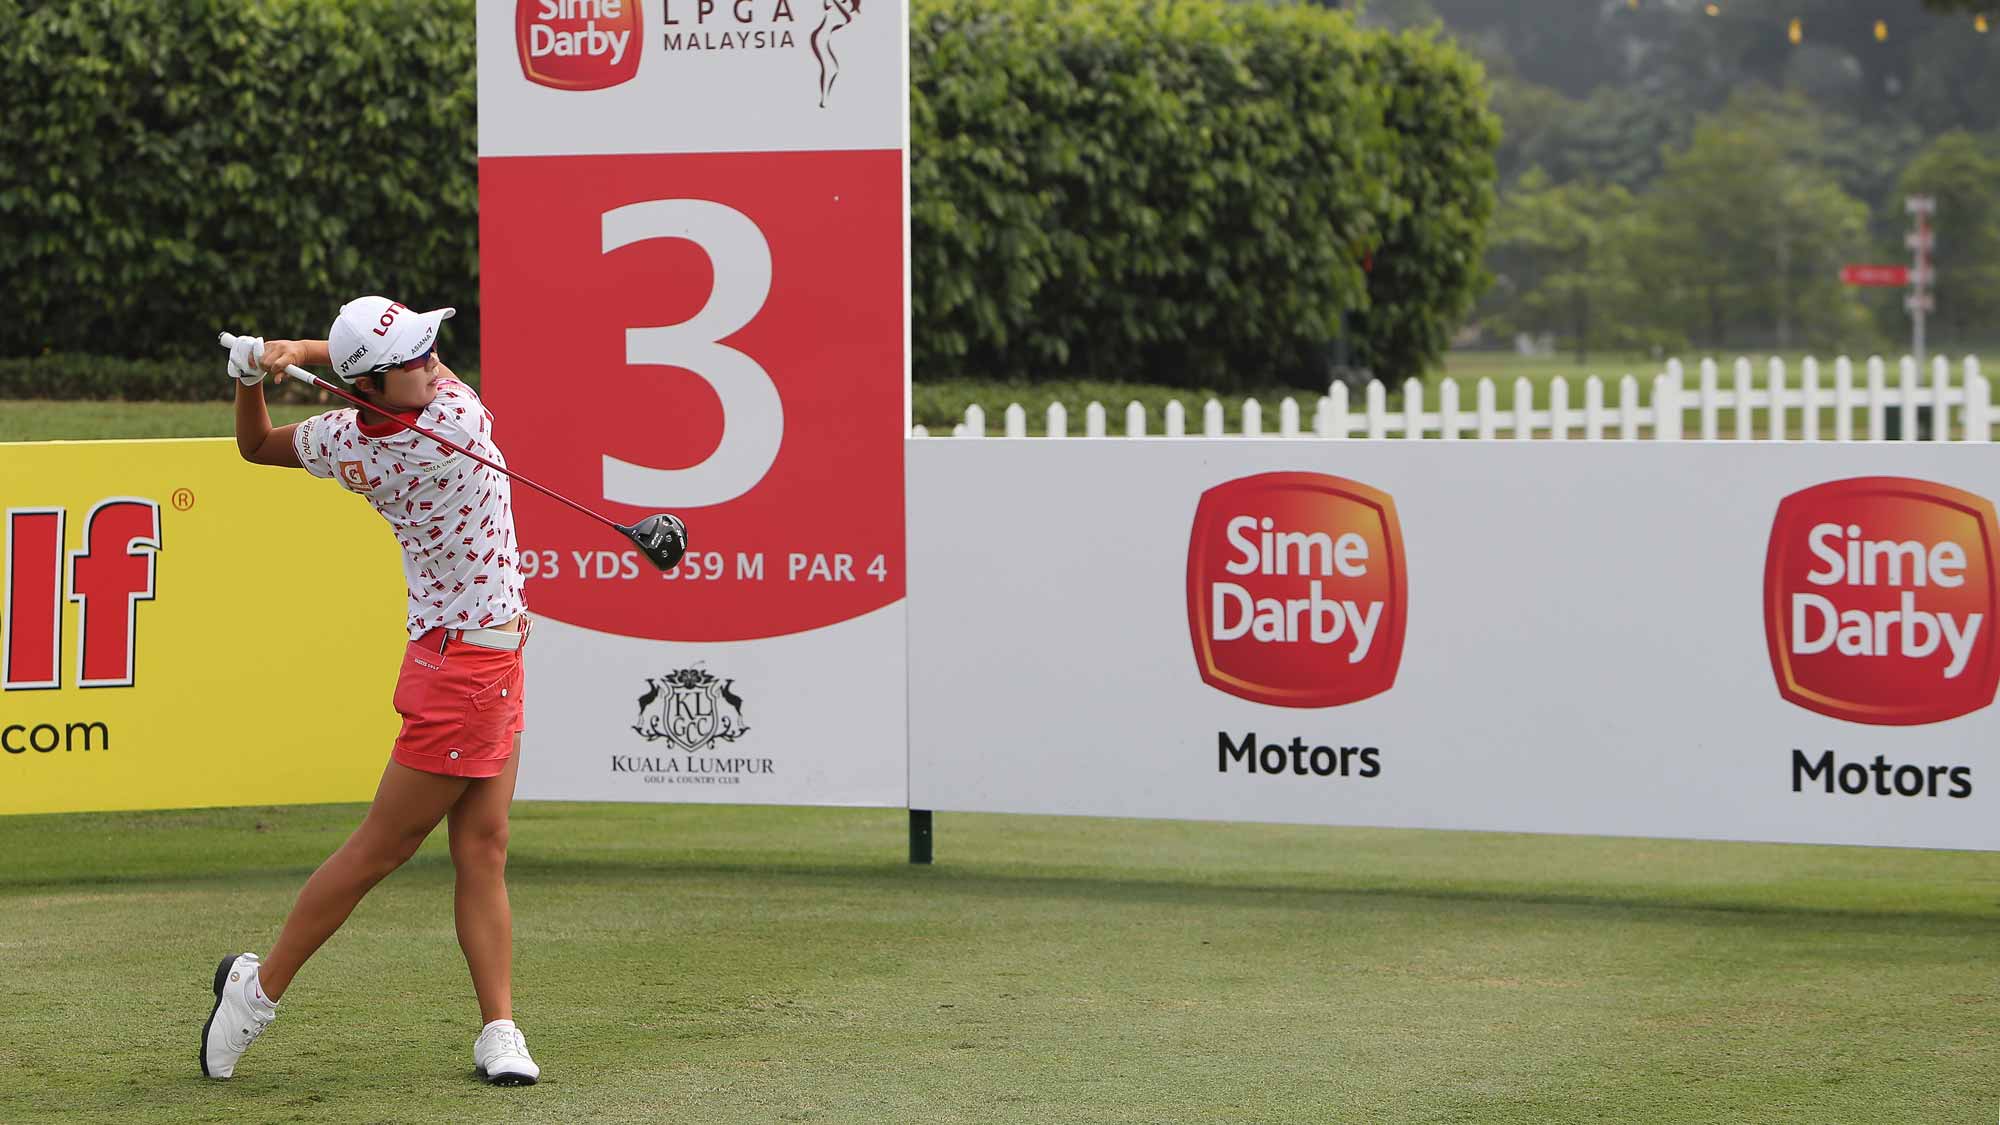 Hyo Joo Kim During her practice round at the 2015 Sime Darby LPGA Malaysia Event